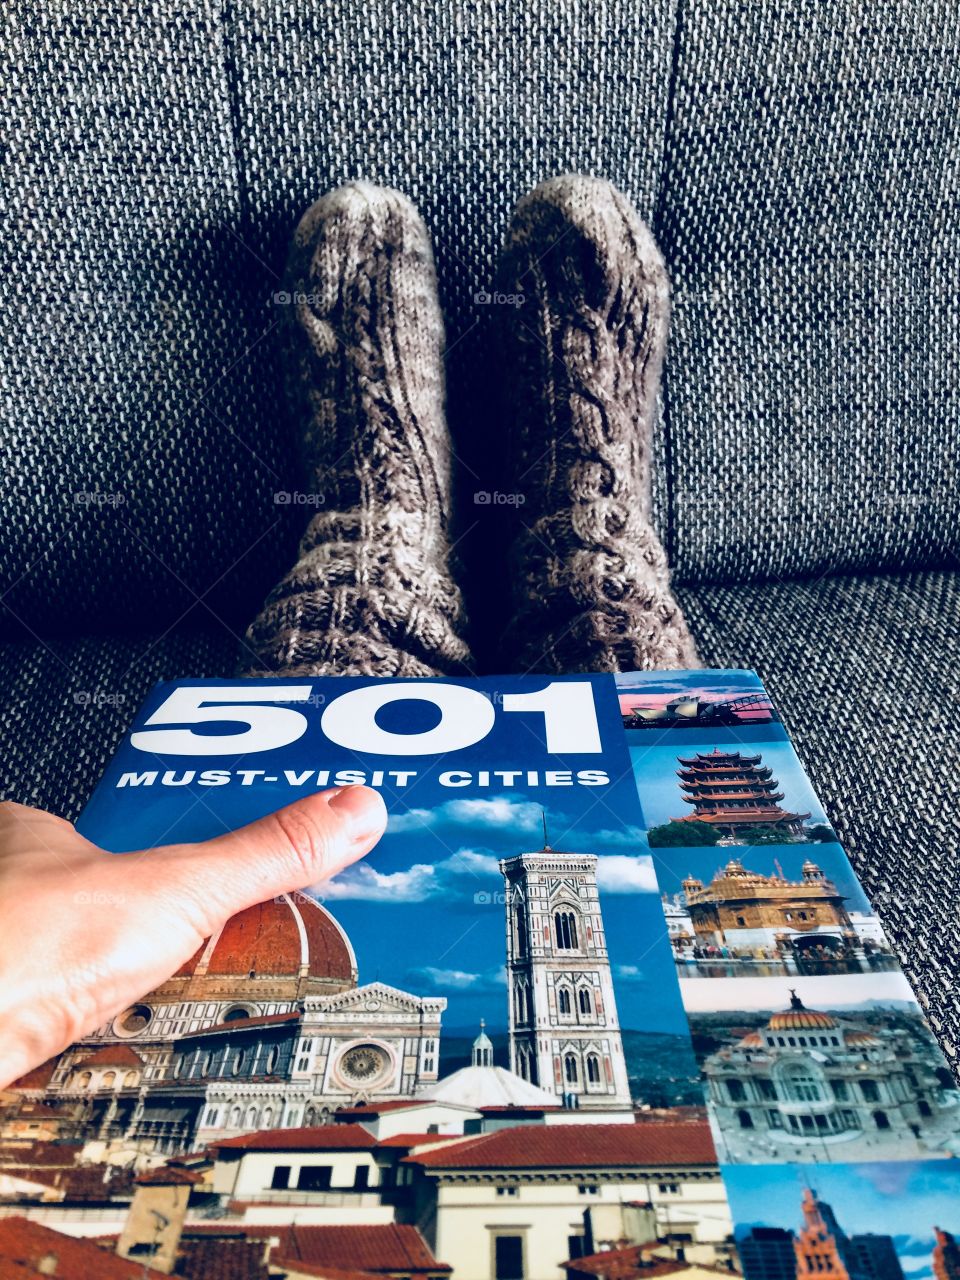 501 must visit cities book and woolen socks